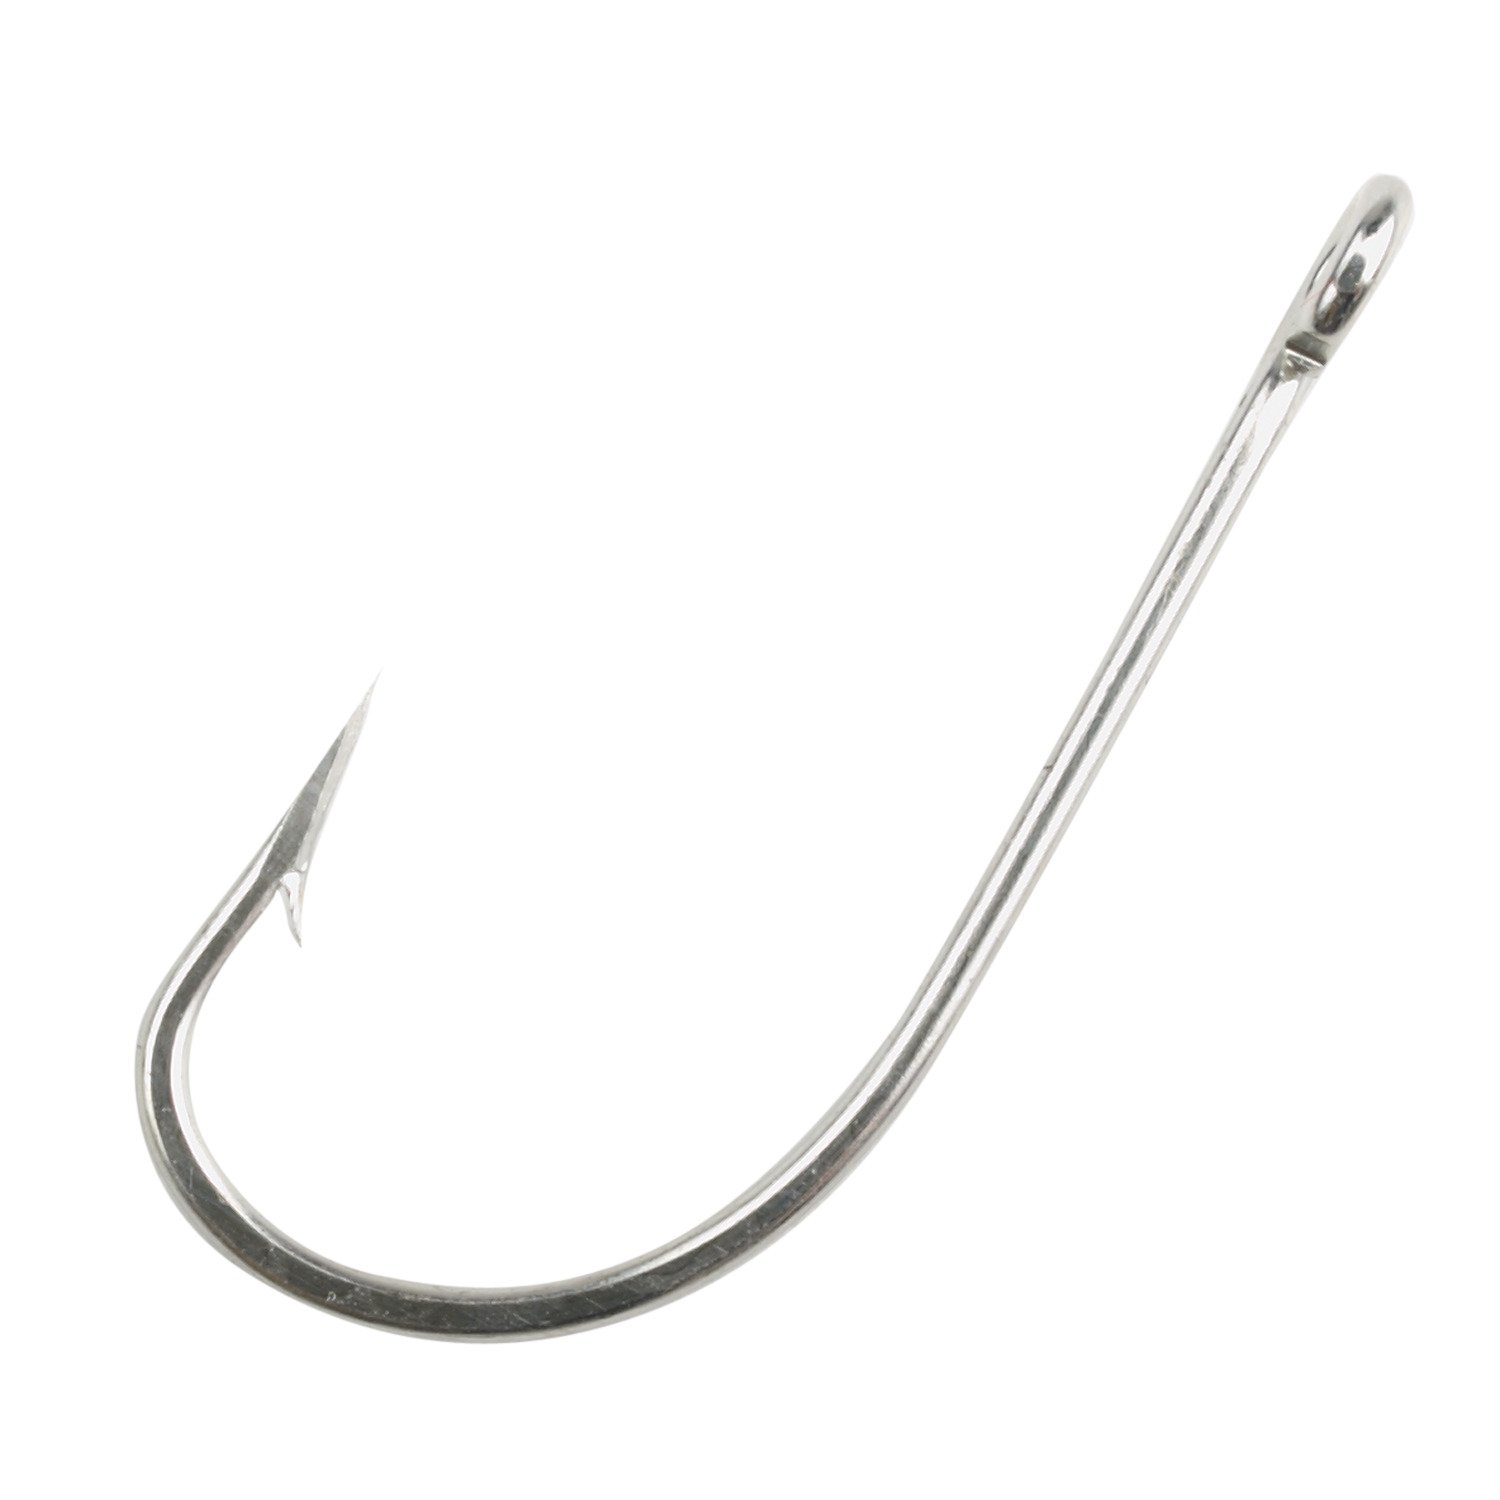 Academy Sports + Outdoors Eagle Claw O'Shaughnessy Single Hooks